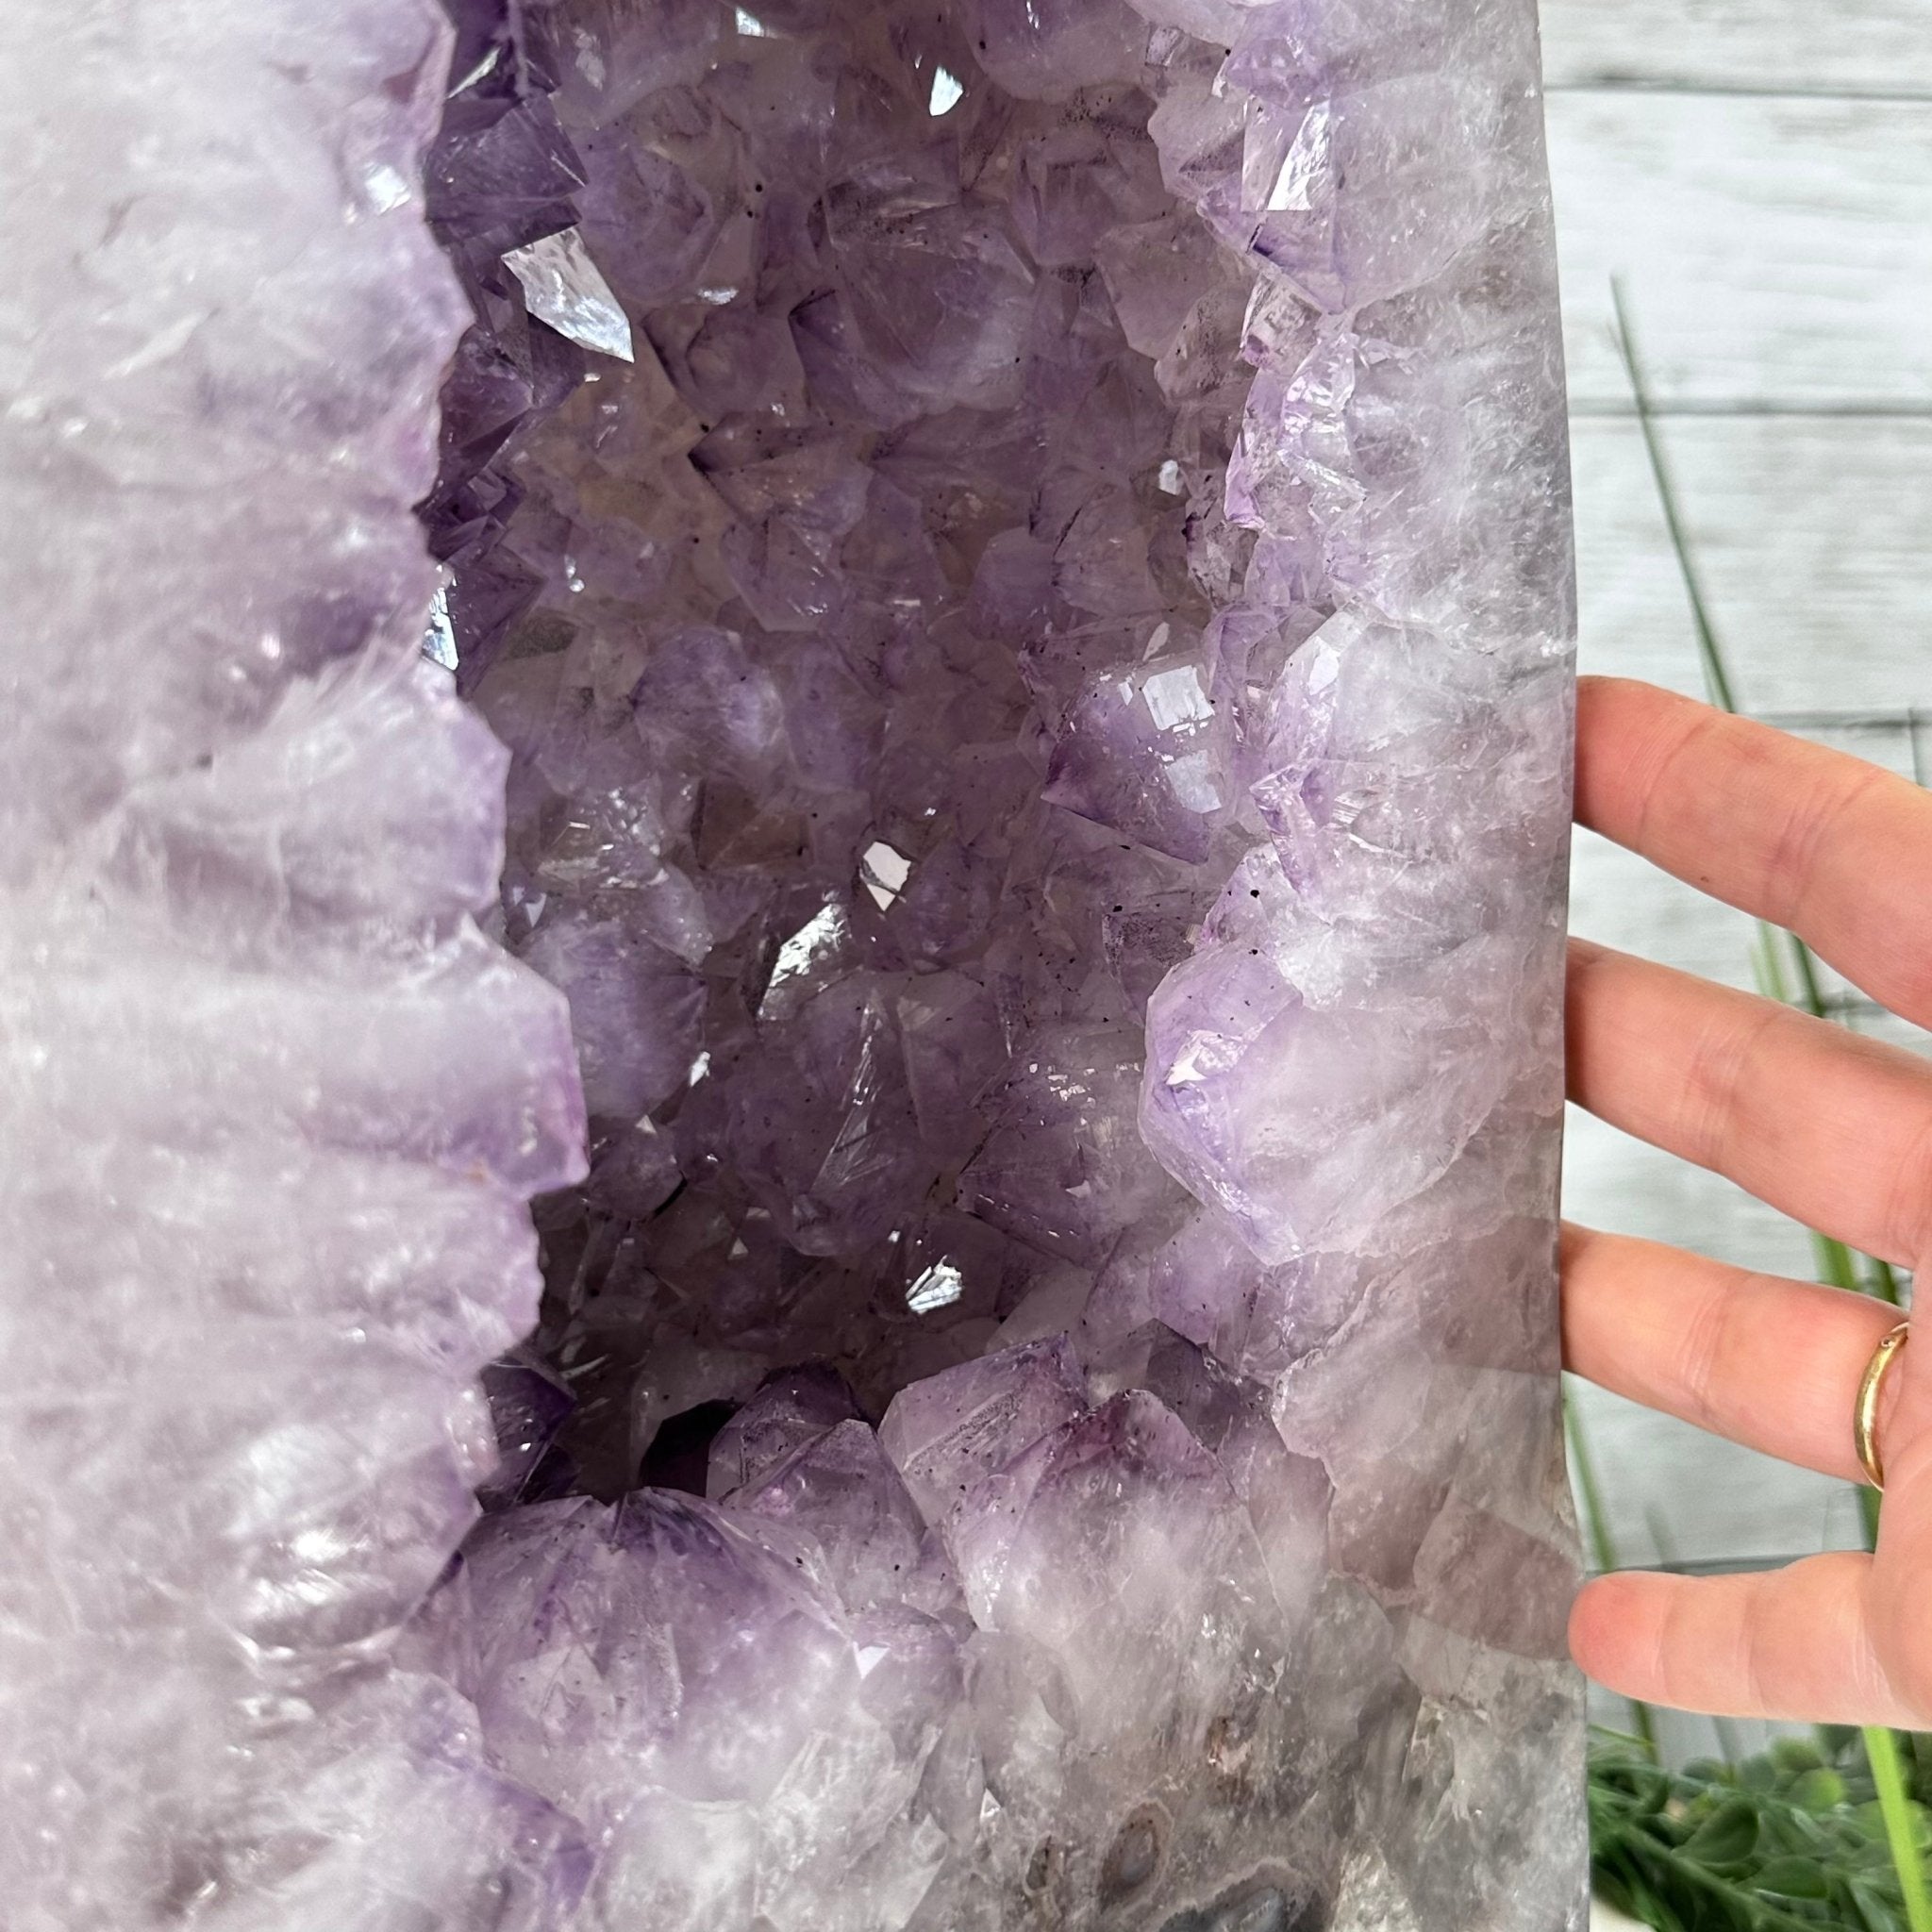 Standard Plus Quality Polished Brazilian Amethyst Cathedral, 46.1 lbs & 17.5" tall Model #5602-0192 by Brazil Gems - Brazil GemsBrazil GemsStandard Plus Quality Polished Brazilian Amethyst Cathedral, 46.1 lbs & 17.5" tall Model #5602-0192 by Brazil GemsPolished Cathedrals5602-0192